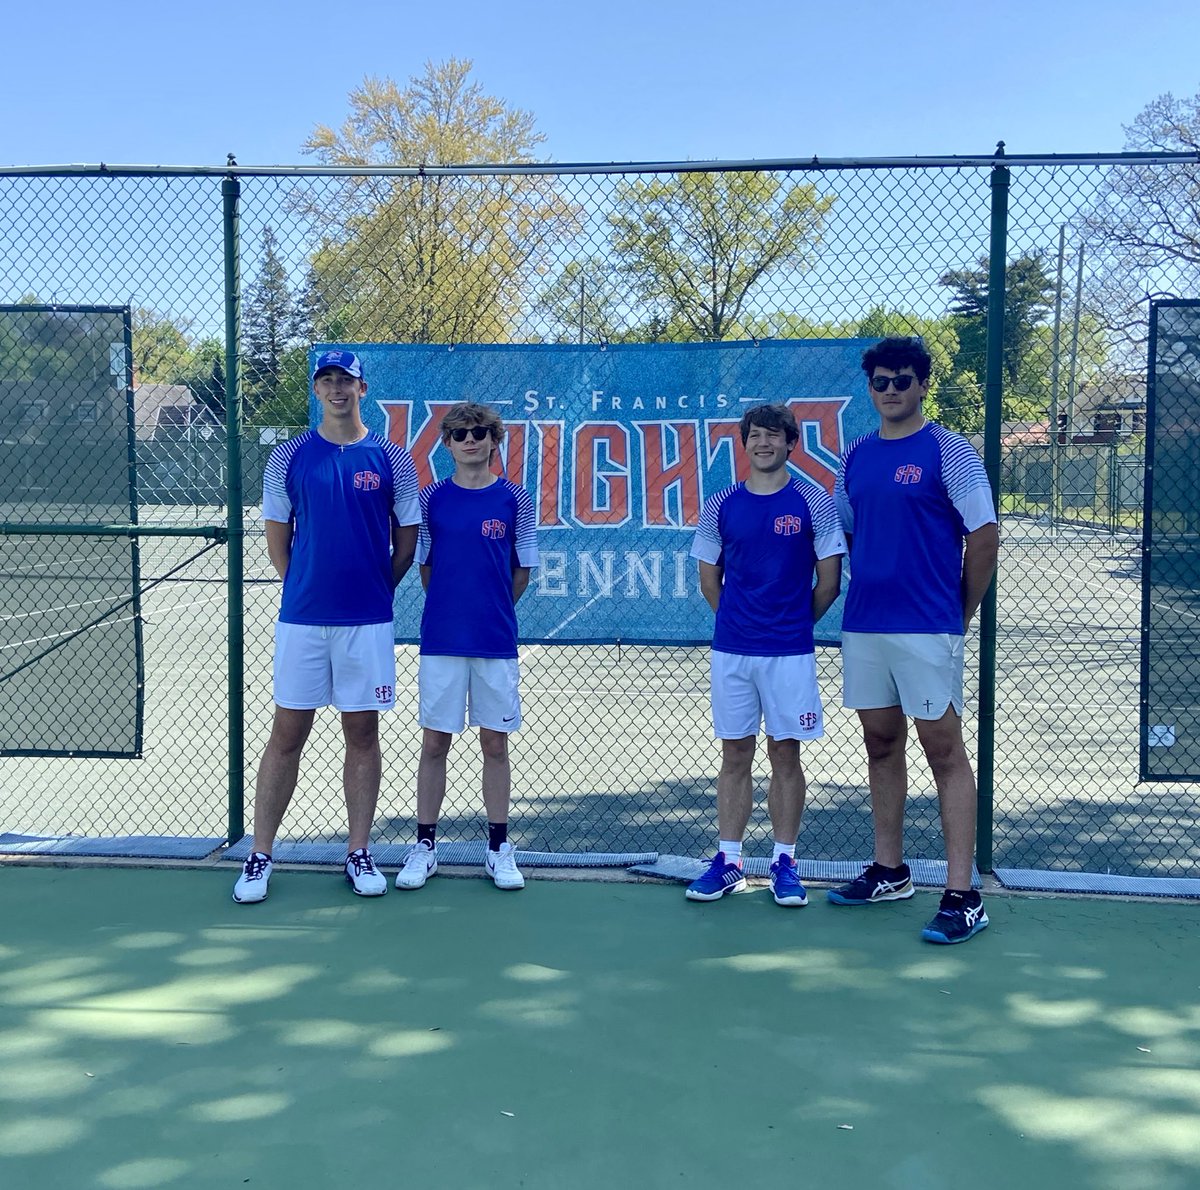 Tennis defeated Northview 5-0 yesterday on Senior Day! Thank you Seniors for all your hard work and dedication to the St. Francis Tennis program. Was great to see some victories on the court yesterday! #GoKnights